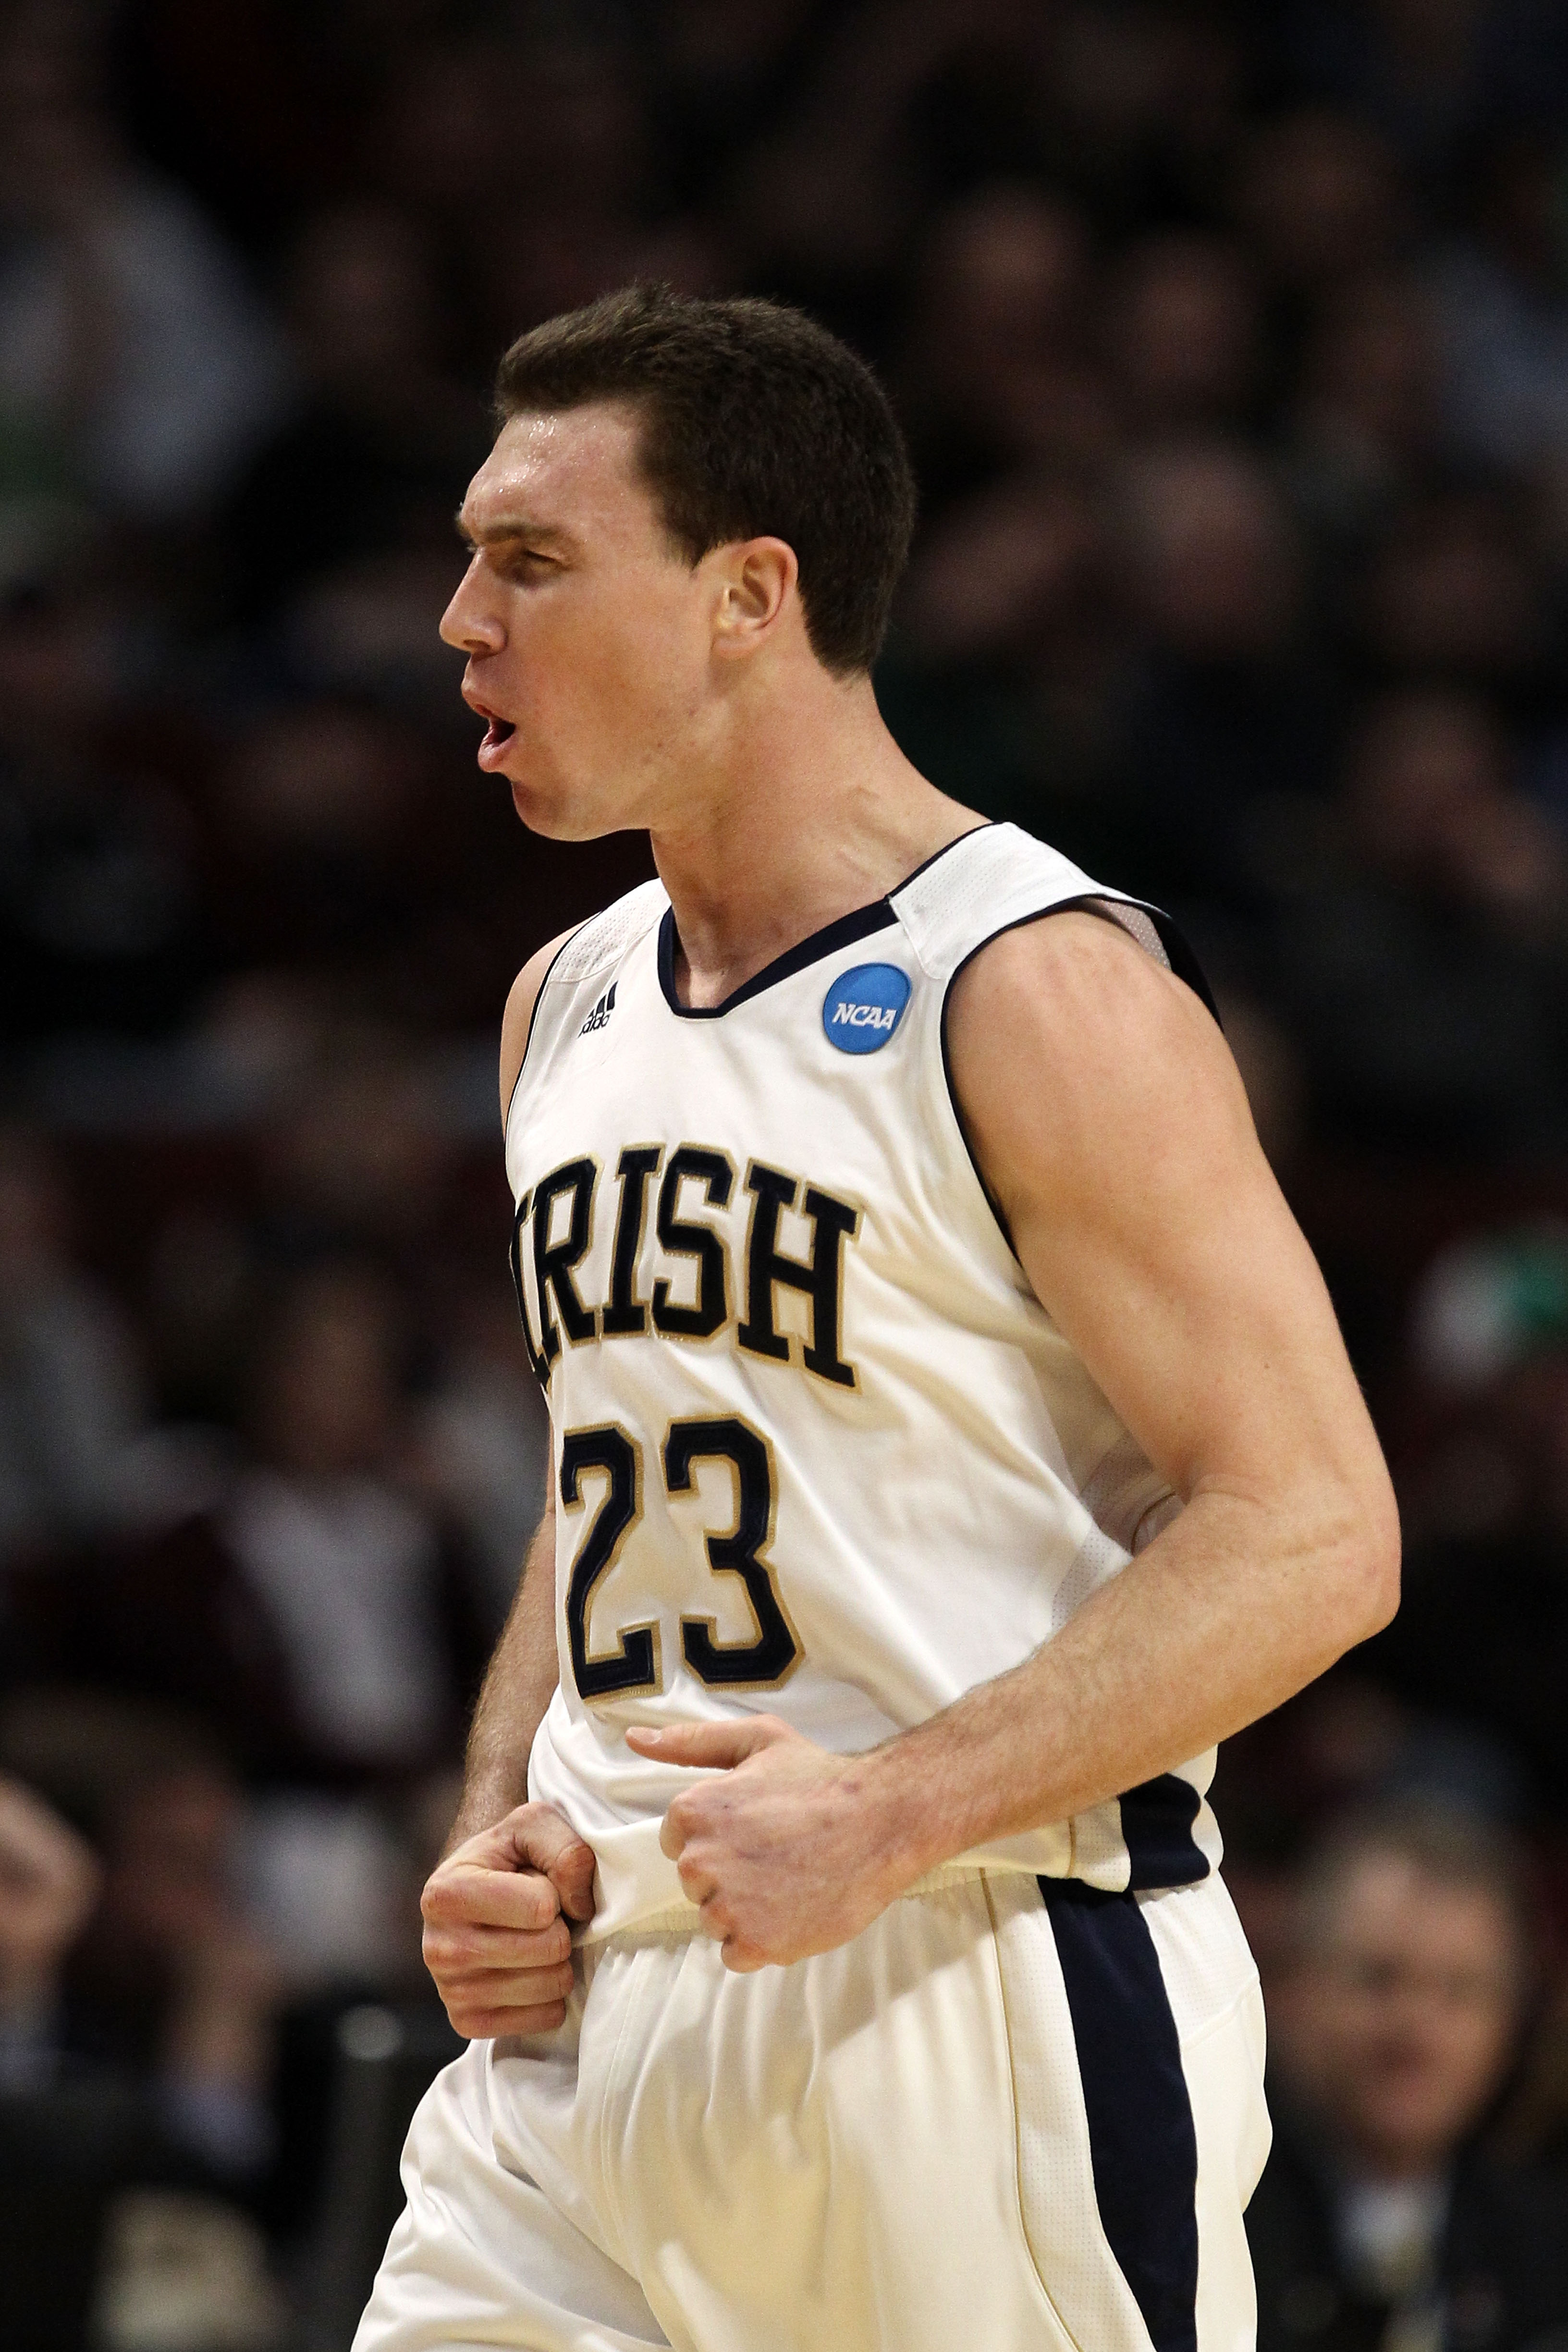 CHICAGO, IL - MARCH 18:  Ben Hansbrough #23 of the Notre Dame Fighting Irish celebrates after scoring against the Akron Zips in the first half during the second round of the 2011 NCAA men's basketball tournament at the United Center on March 18, 2011 in C